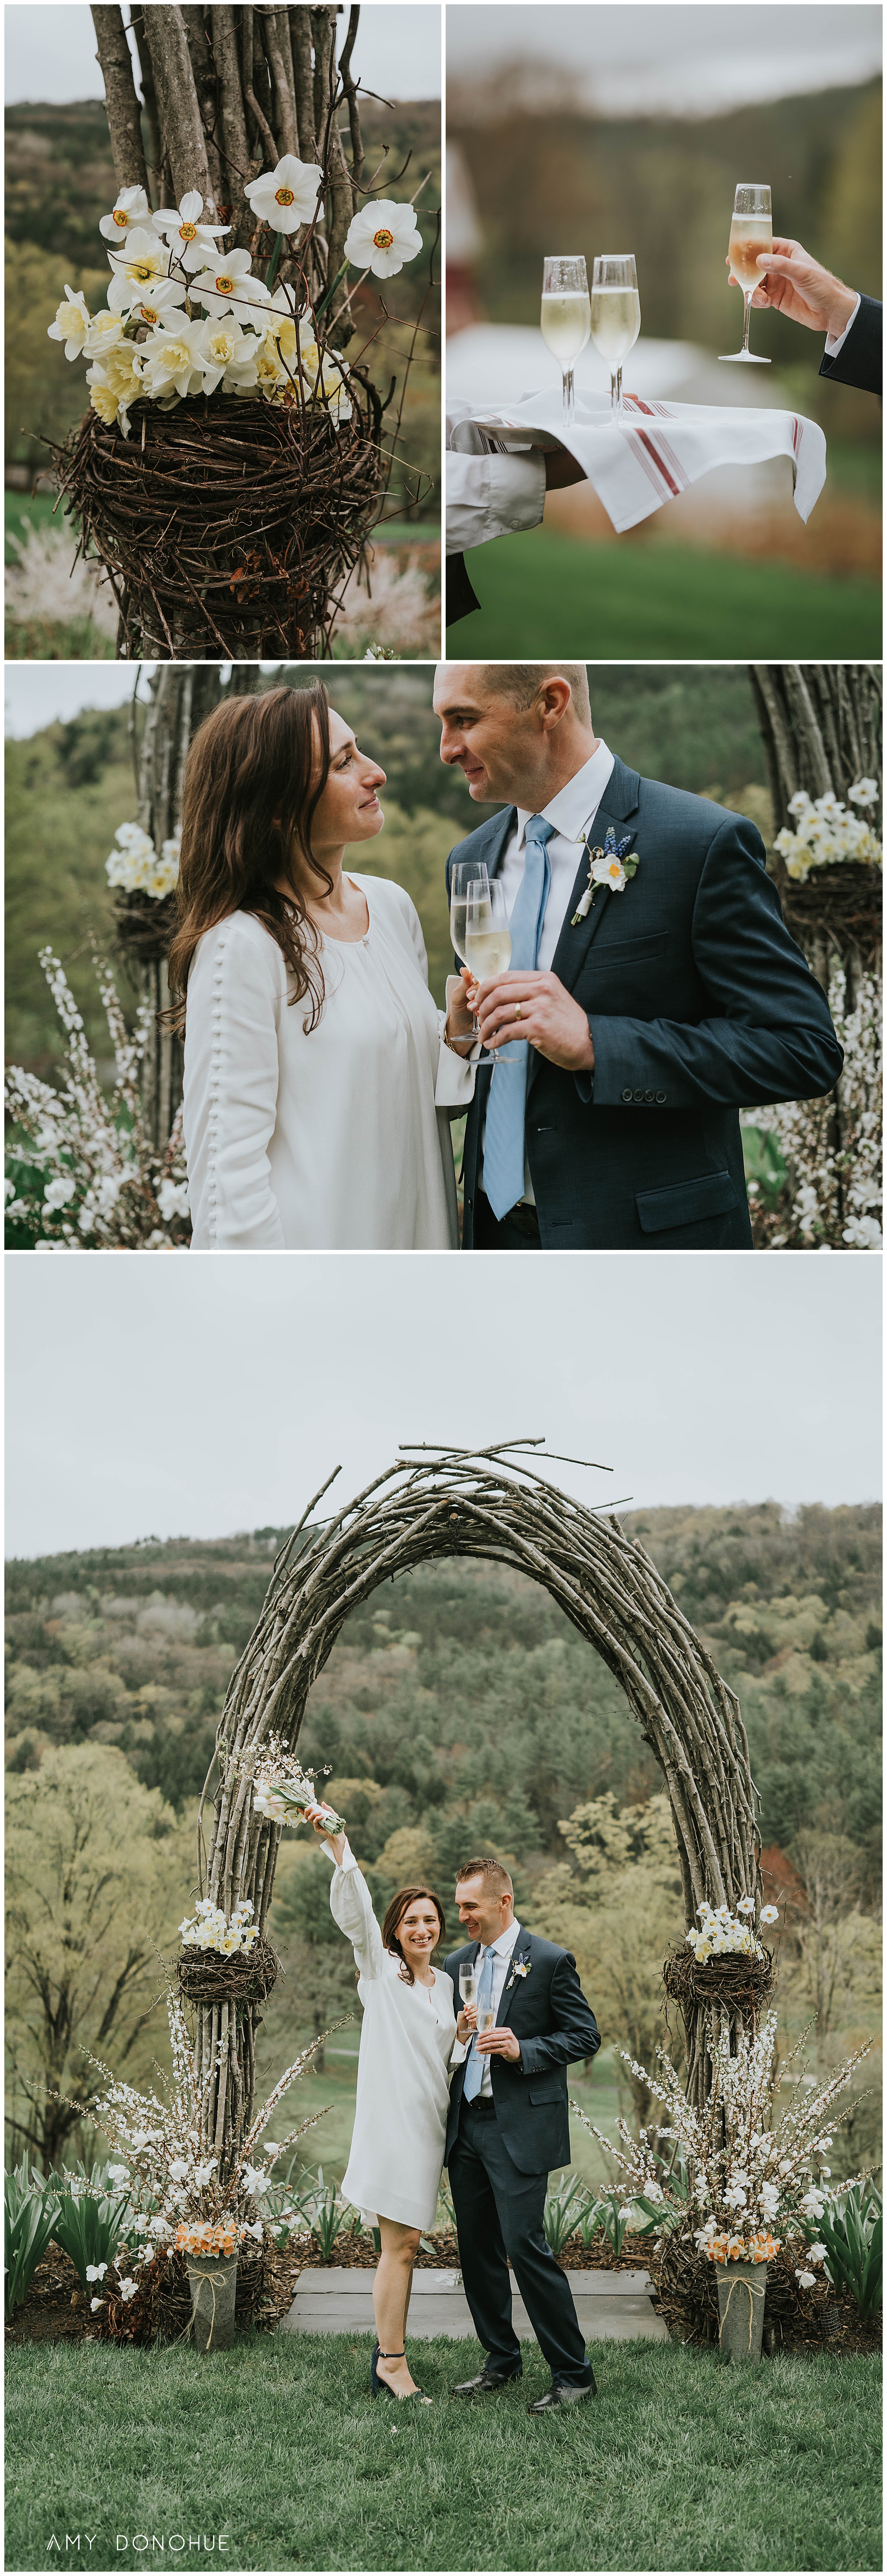 Intimate elopement ceremony at Kelly Way Gardens at the Woodstock Inn and Resort in Woodstock, Vermont